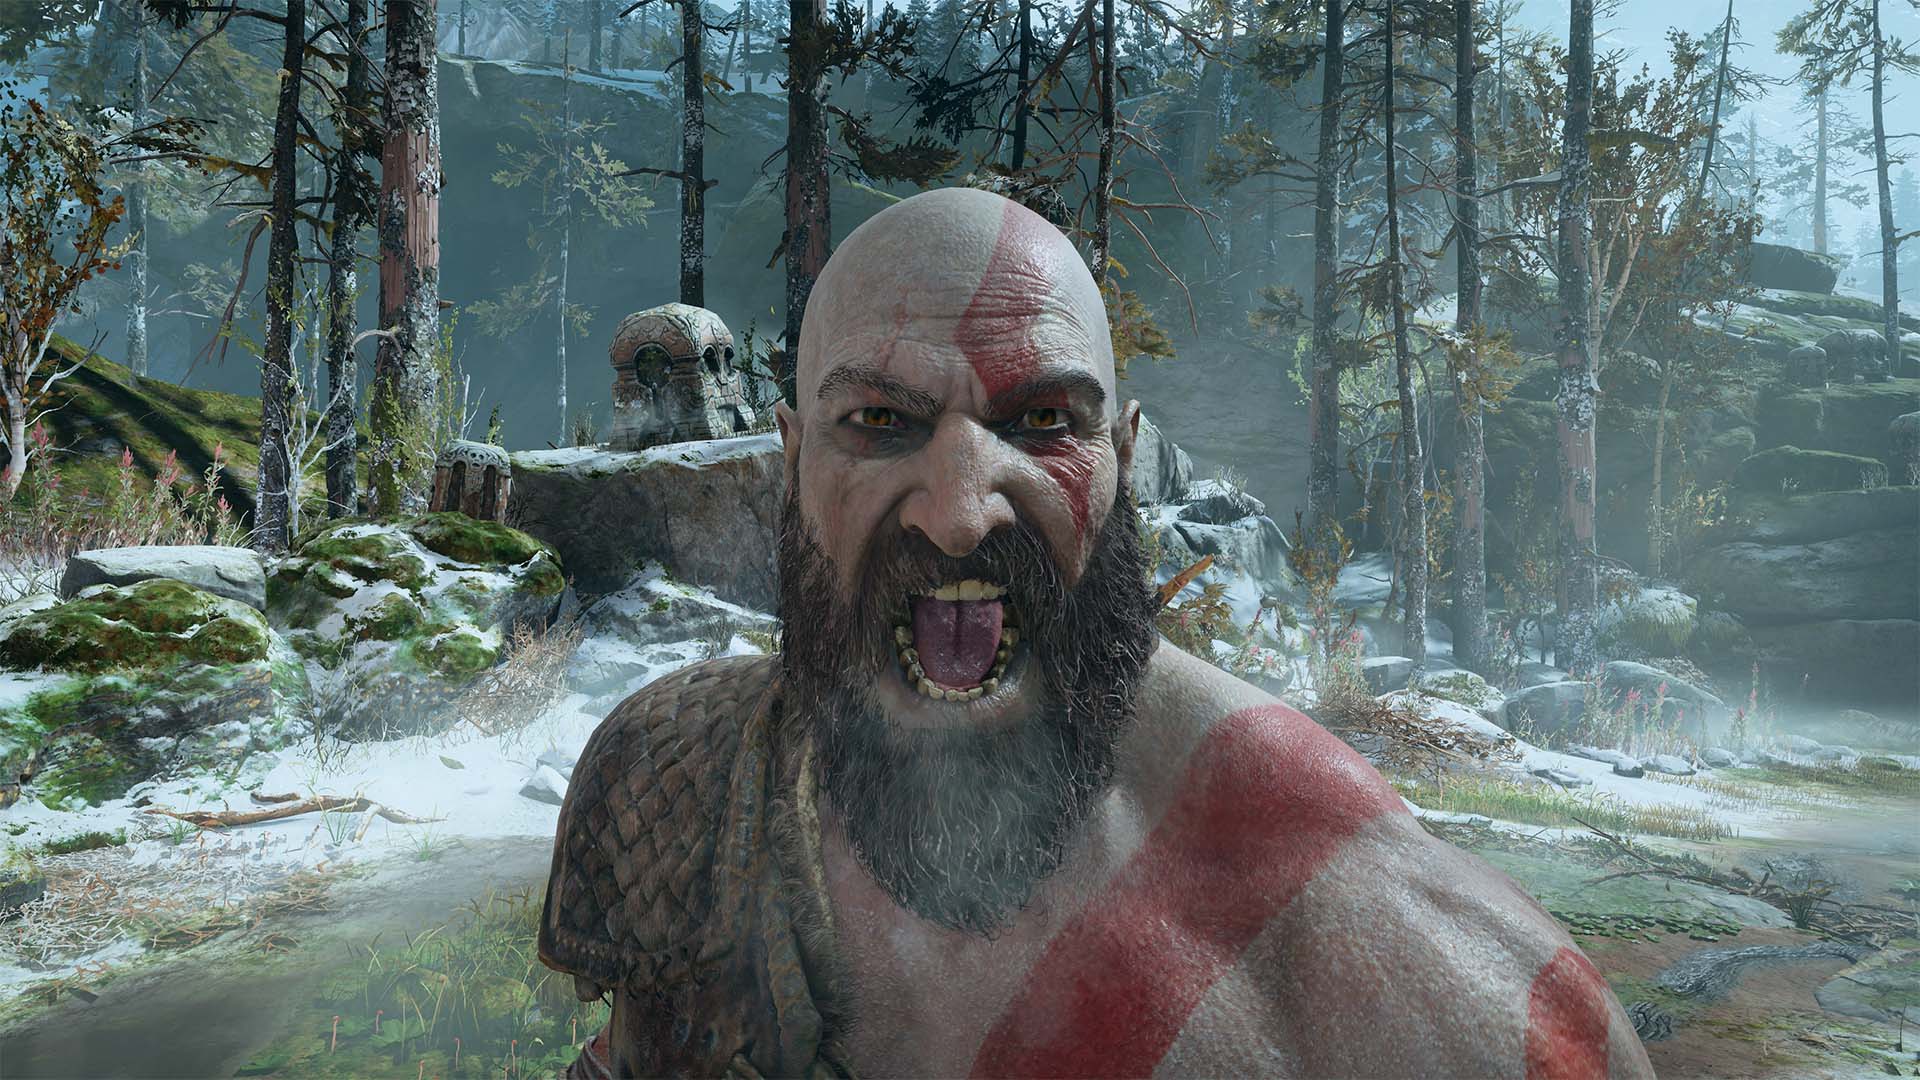 God of War PC review: The best PlayStation exclusive comes to Windows -  Polygon